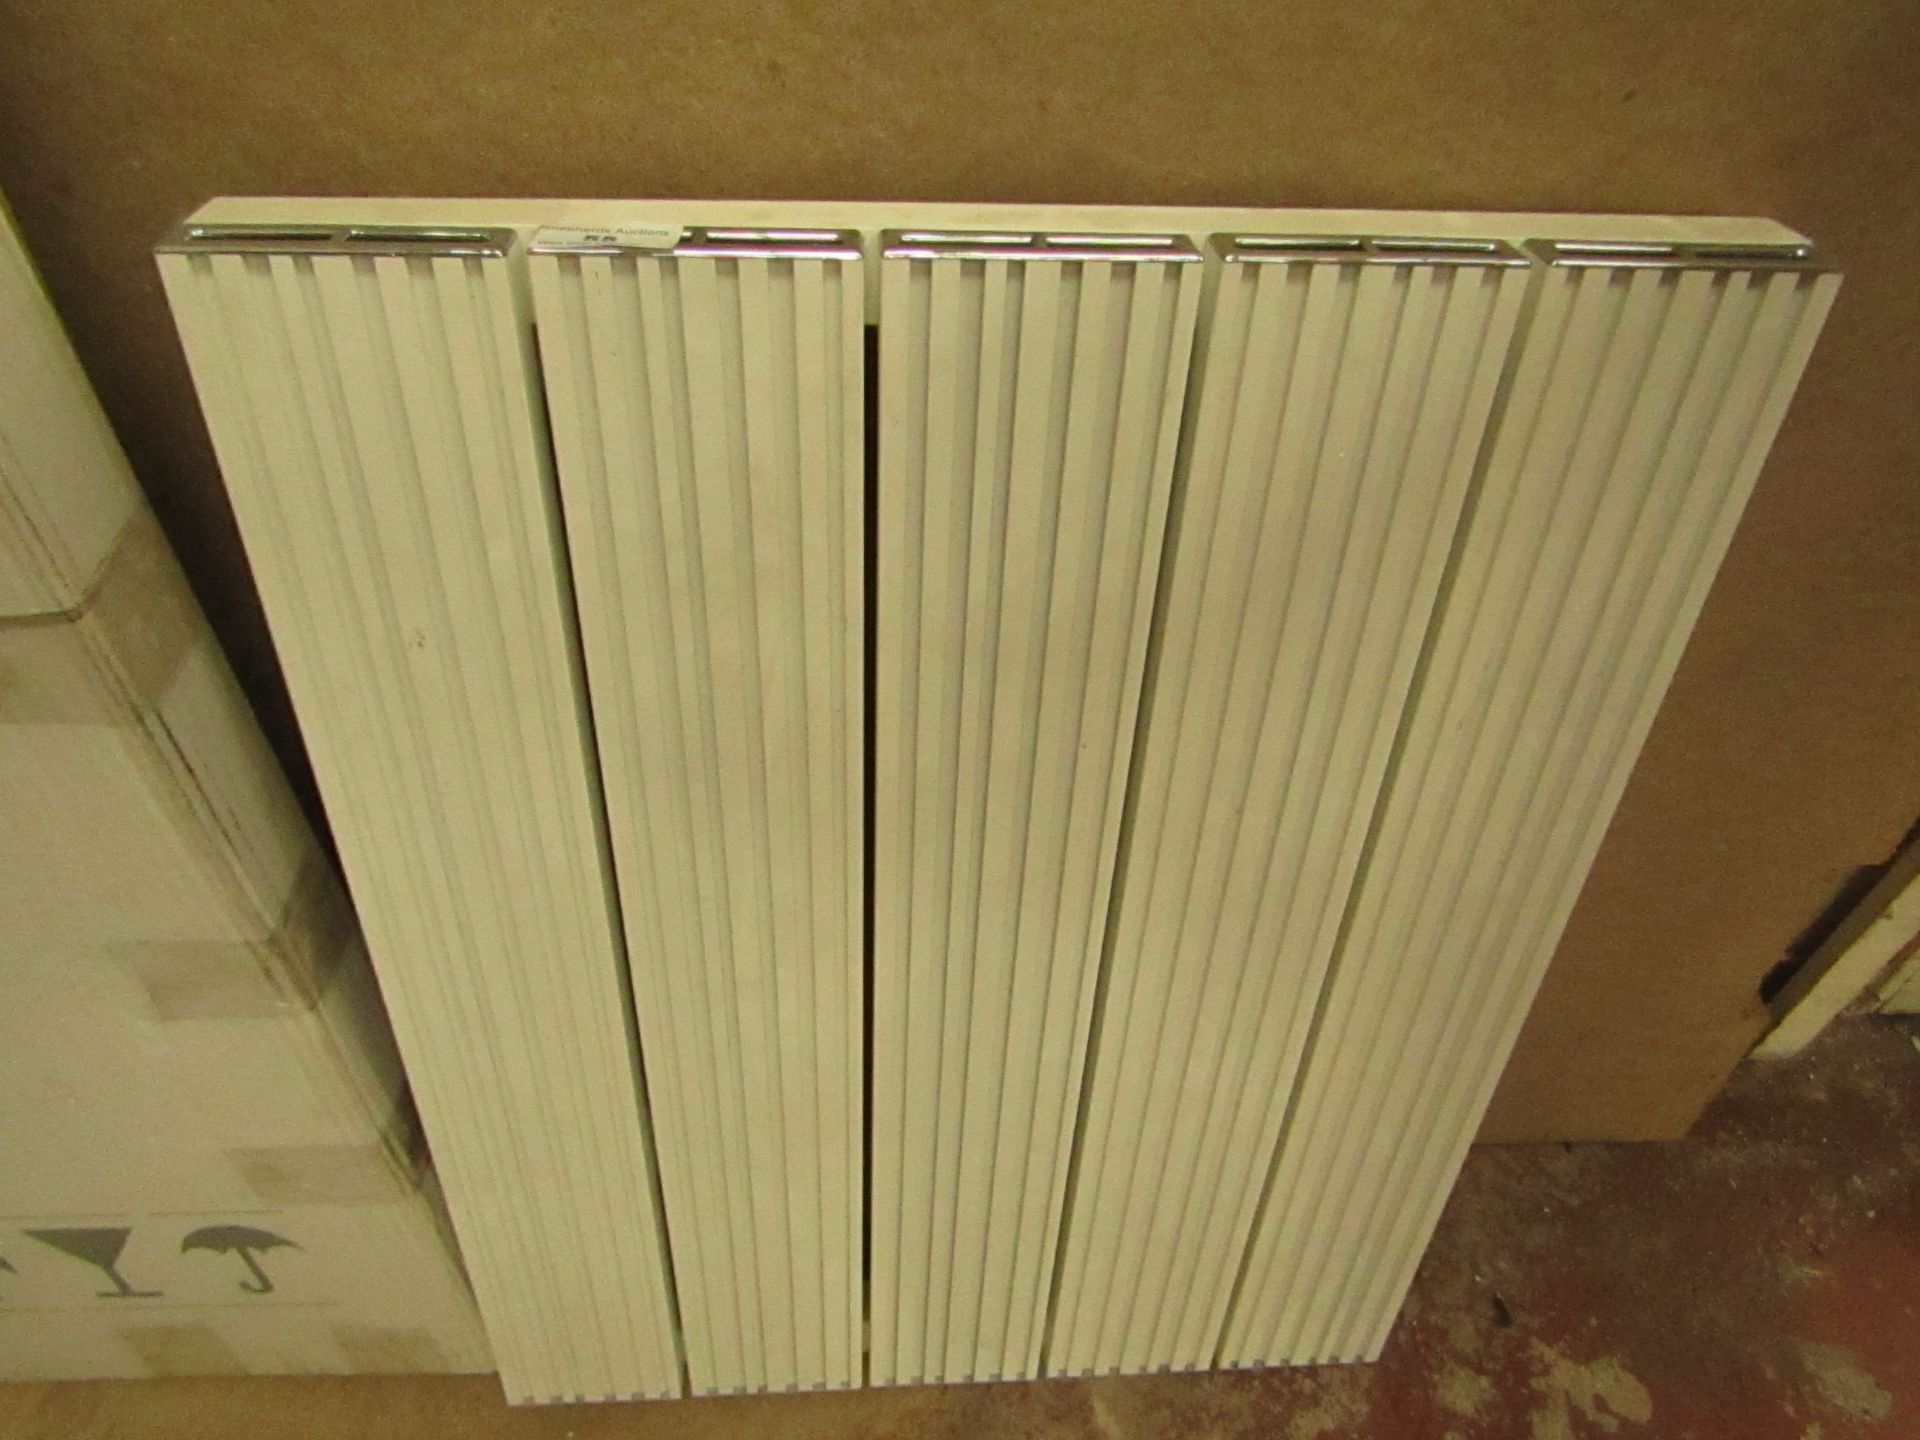 White & Chrome Wall Mounted Radiator 470x600mm - Unboxed.